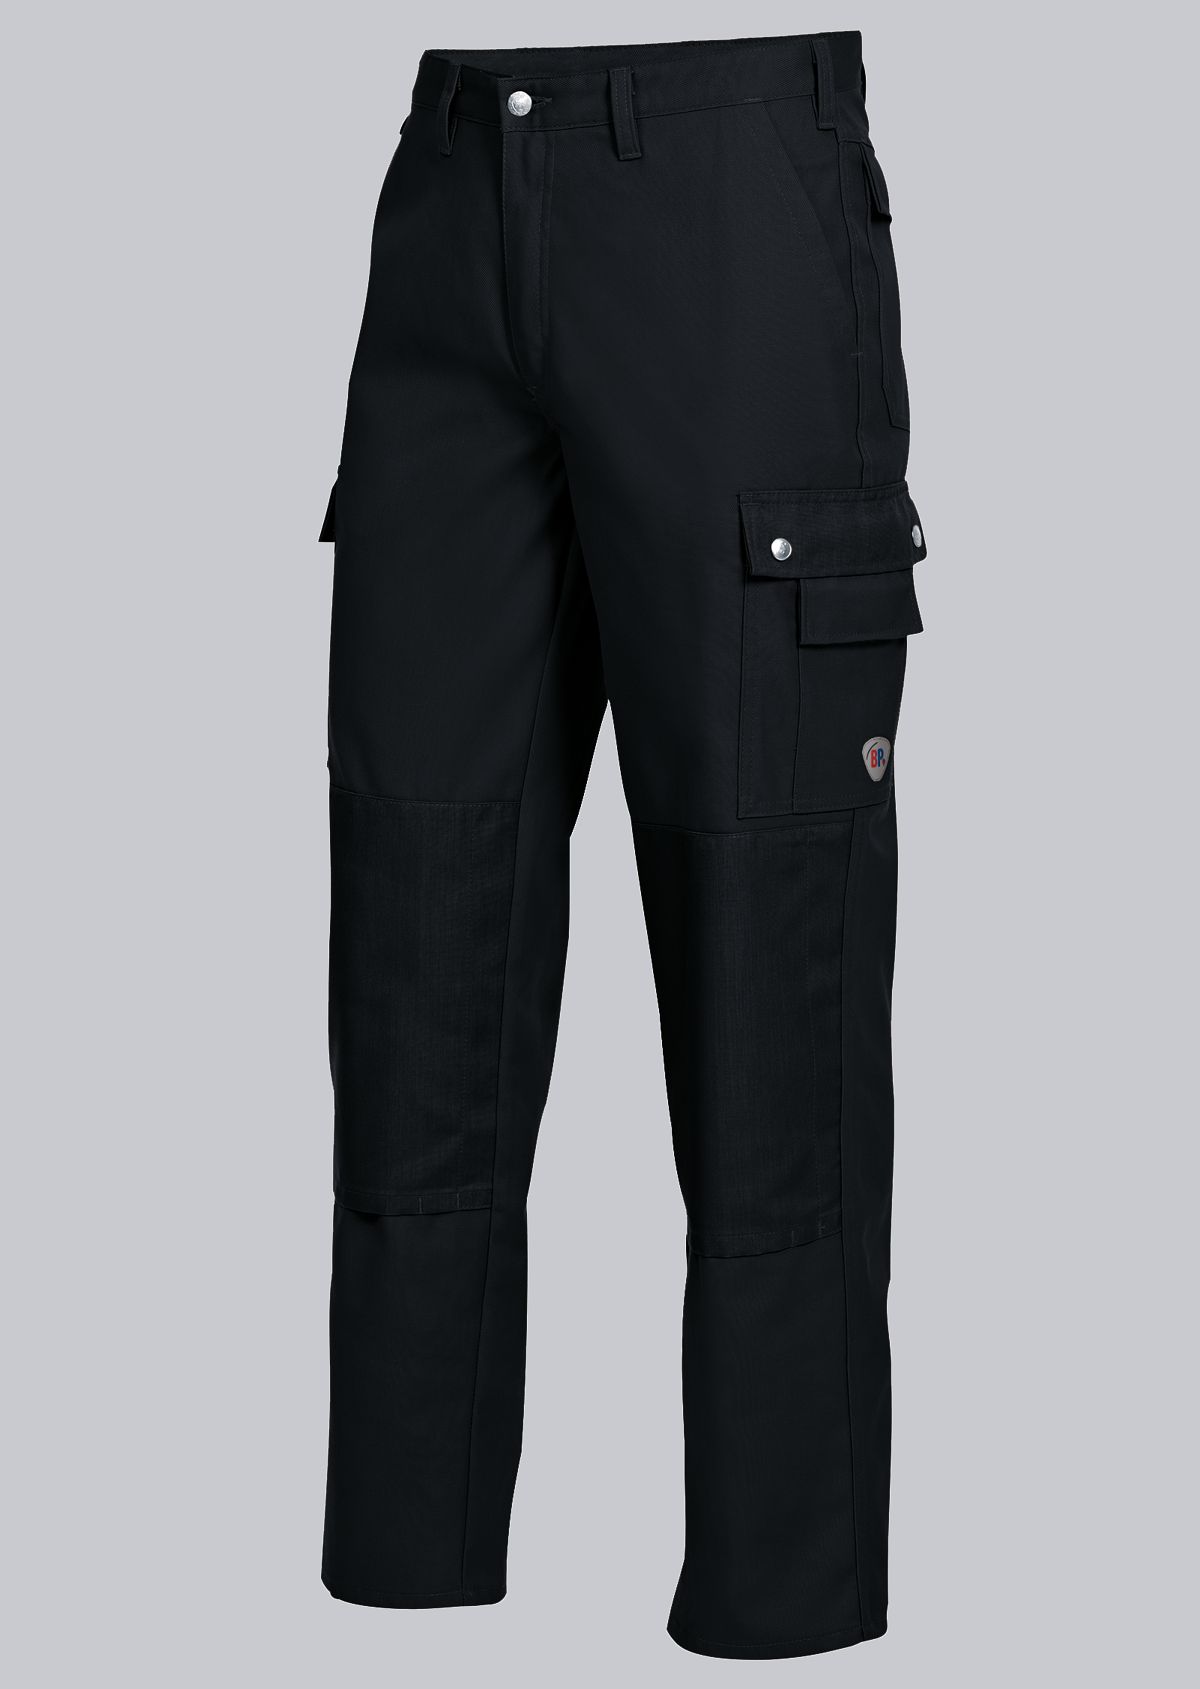 BP® Comfort cargo trousers with knee pad pockets